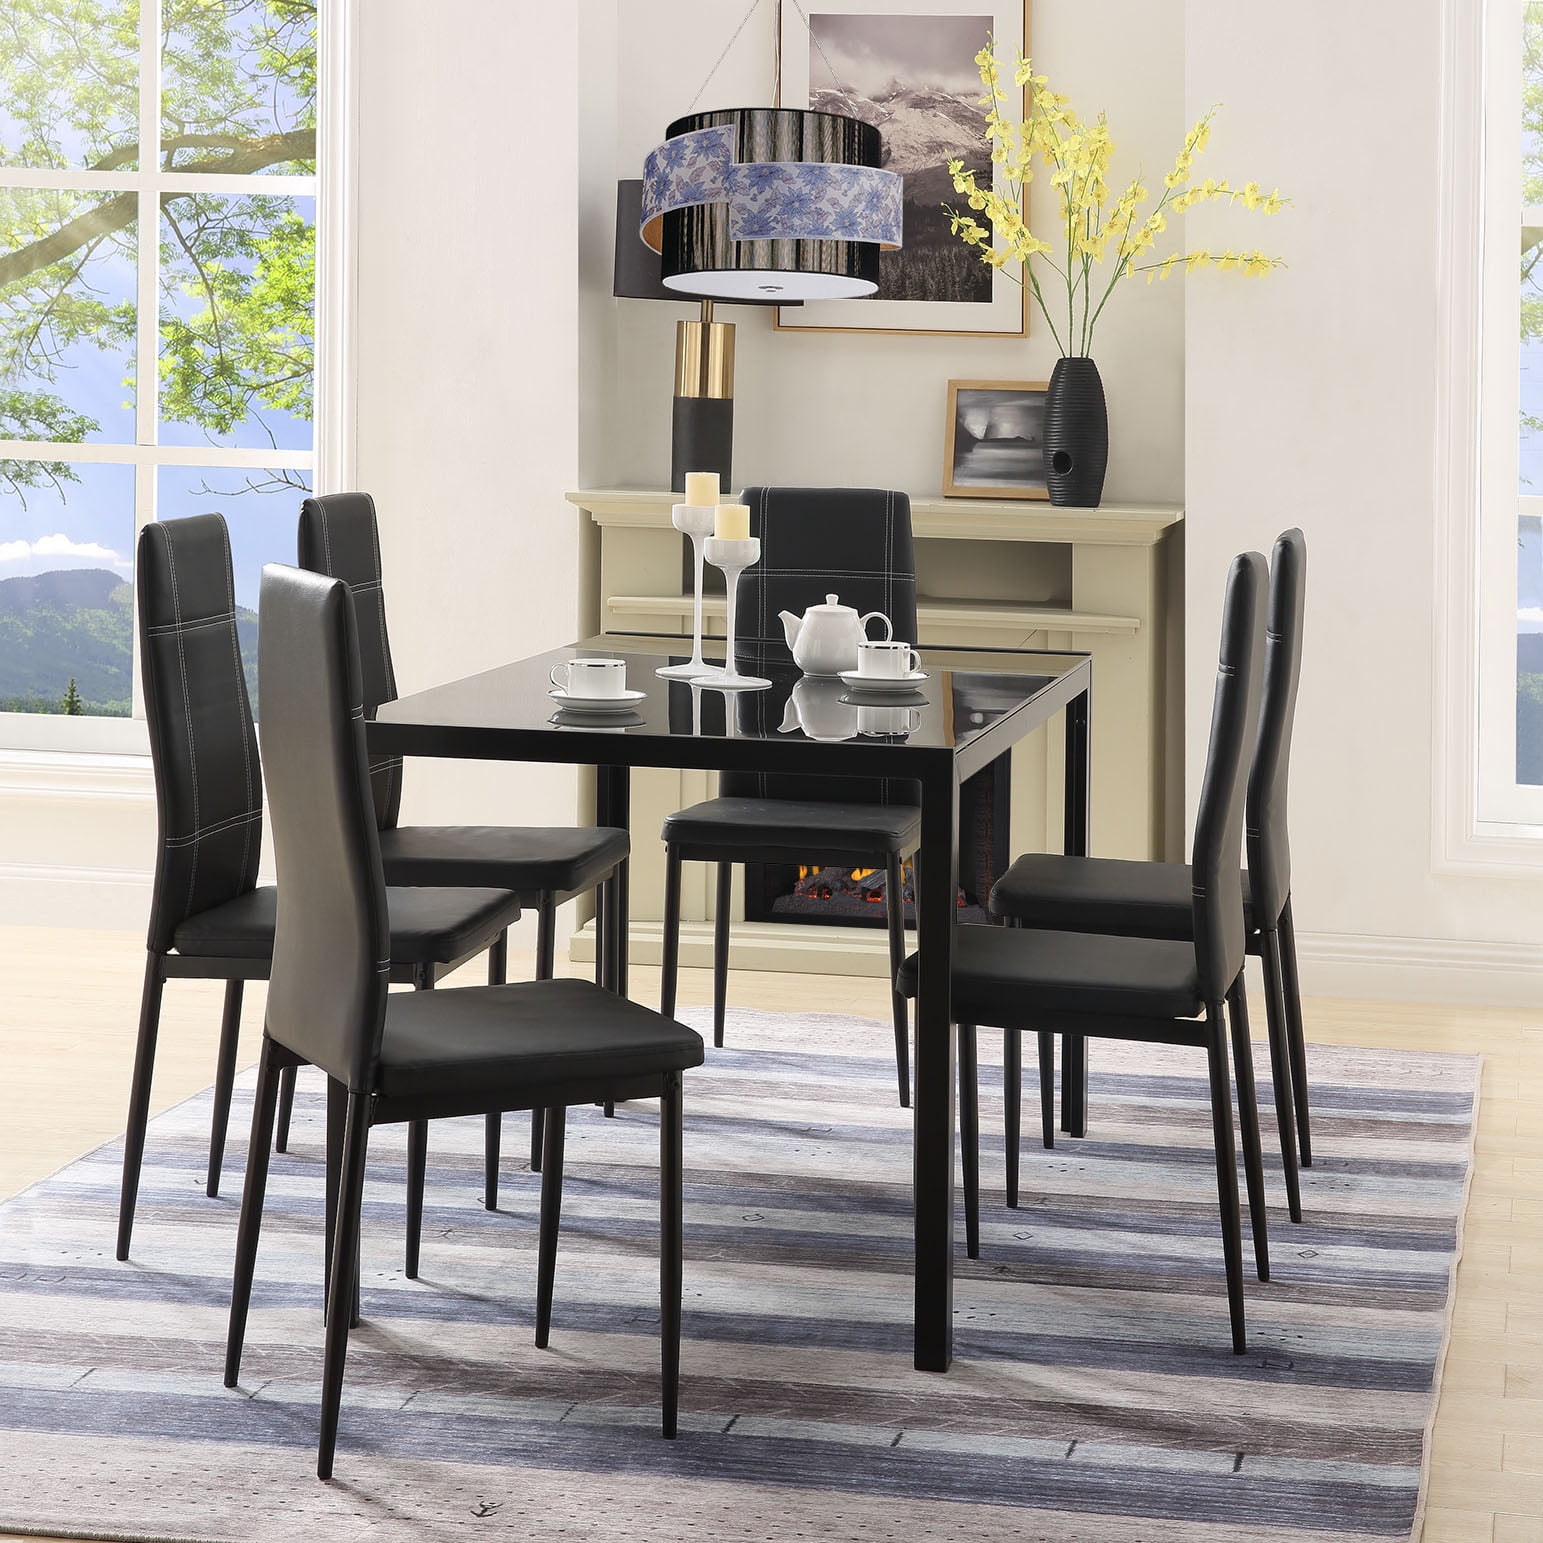 Details about   6 PCS Stripping Texture Kitchen Dining Glass Metal Chairs Furniture Breakfast 